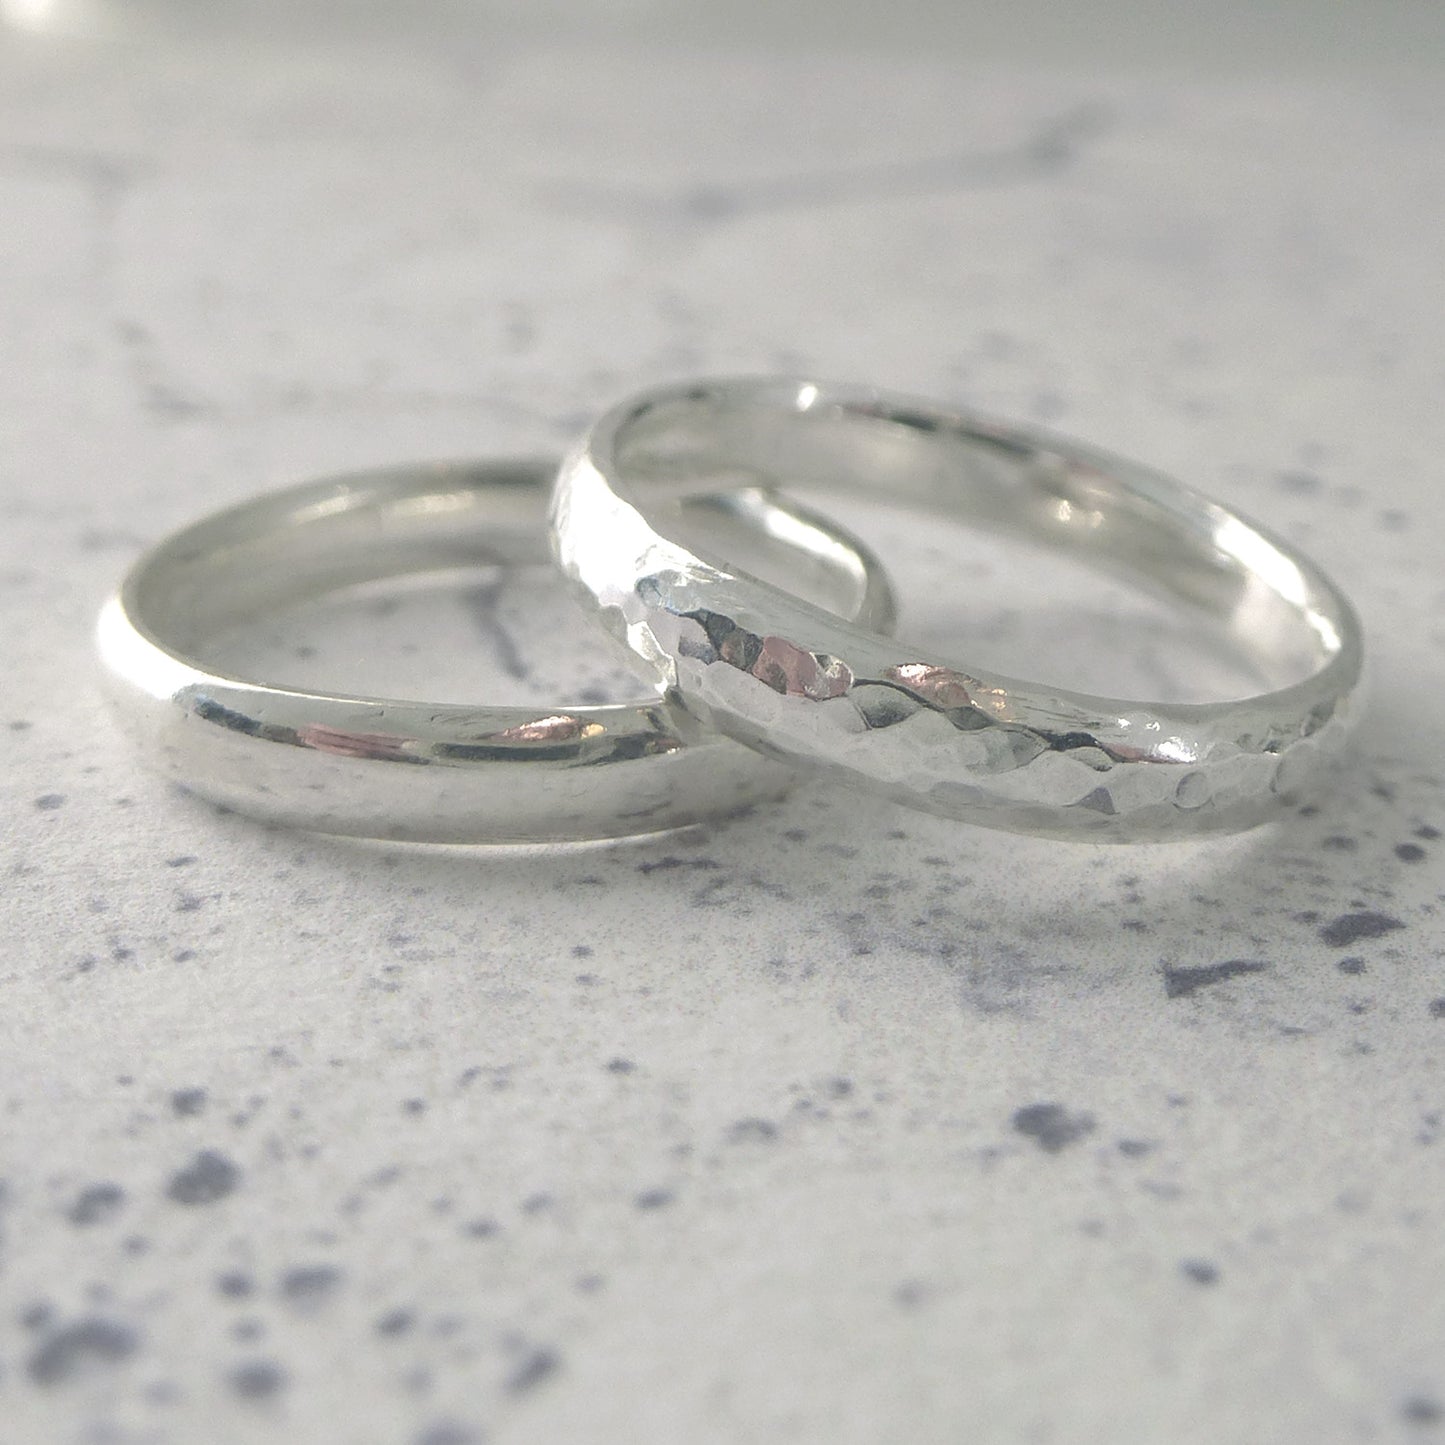 Hand Shaped Band Ring in Sterling Silver - 3mm - Hammered or Smooth